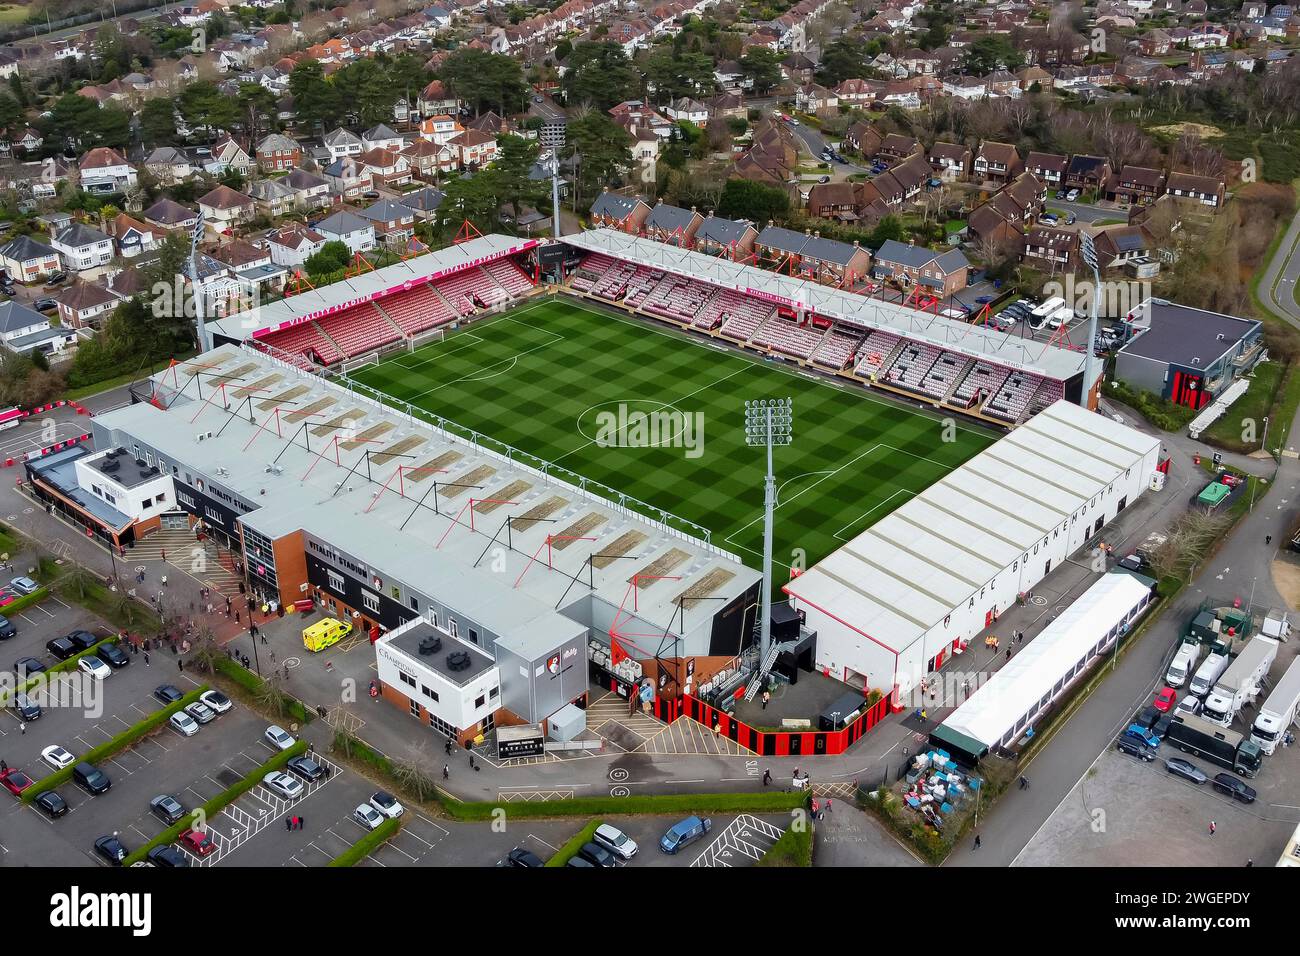 Aerial view of the Vitality Stadium at Kings Park at Bournemouth in Dorset which is the home of Premier League football club AFC Bournemouth. Stock Photo